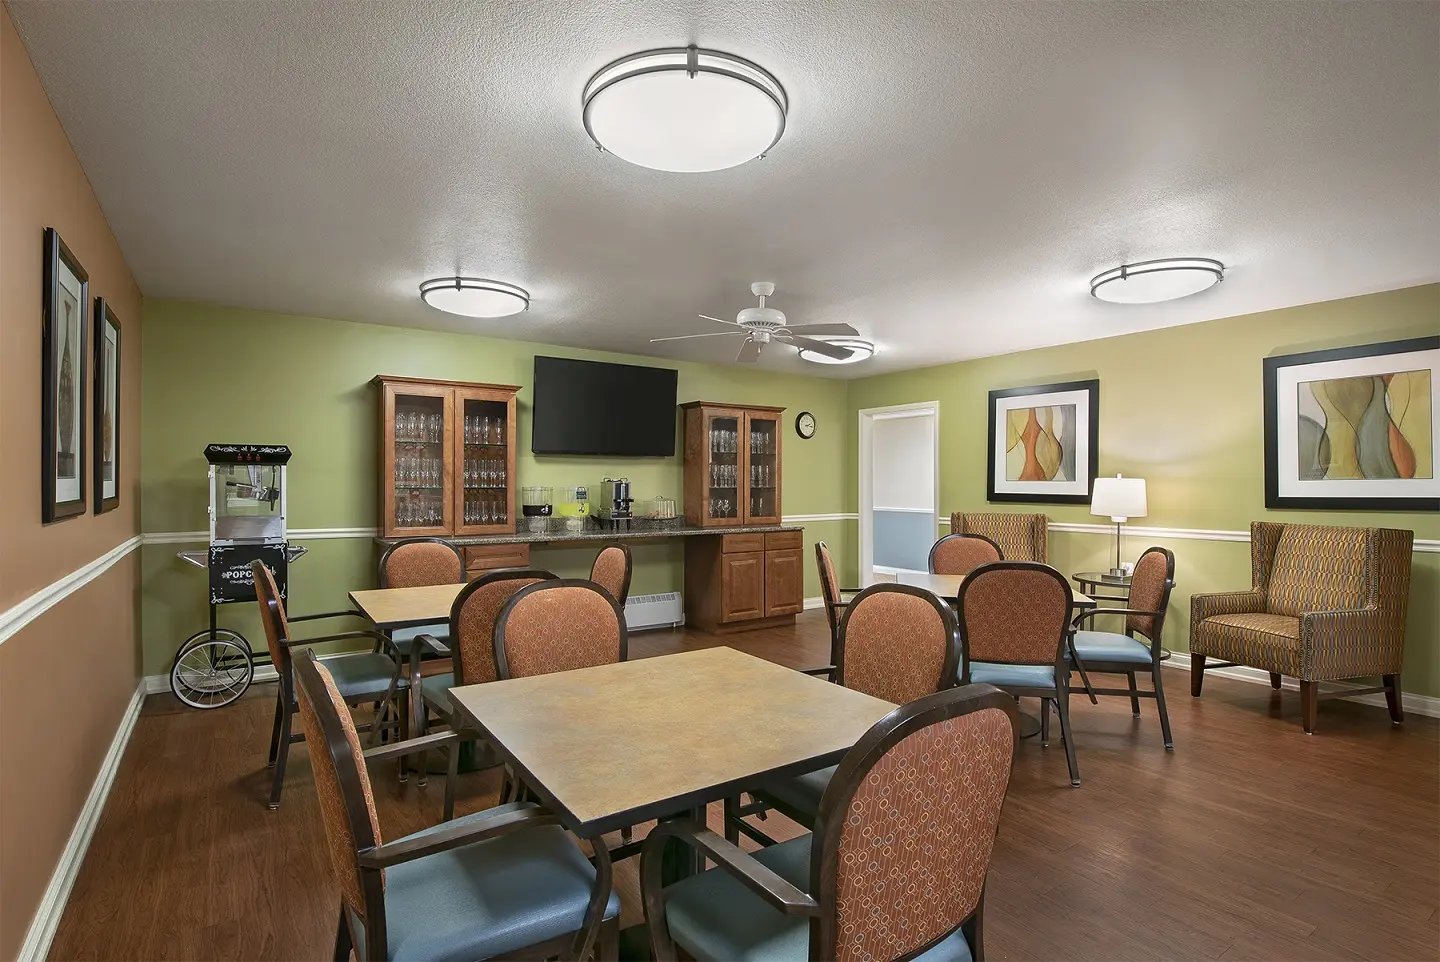 Activity room / common area of American House Charlevoix, a retirement community in Charlevoix, Michigan